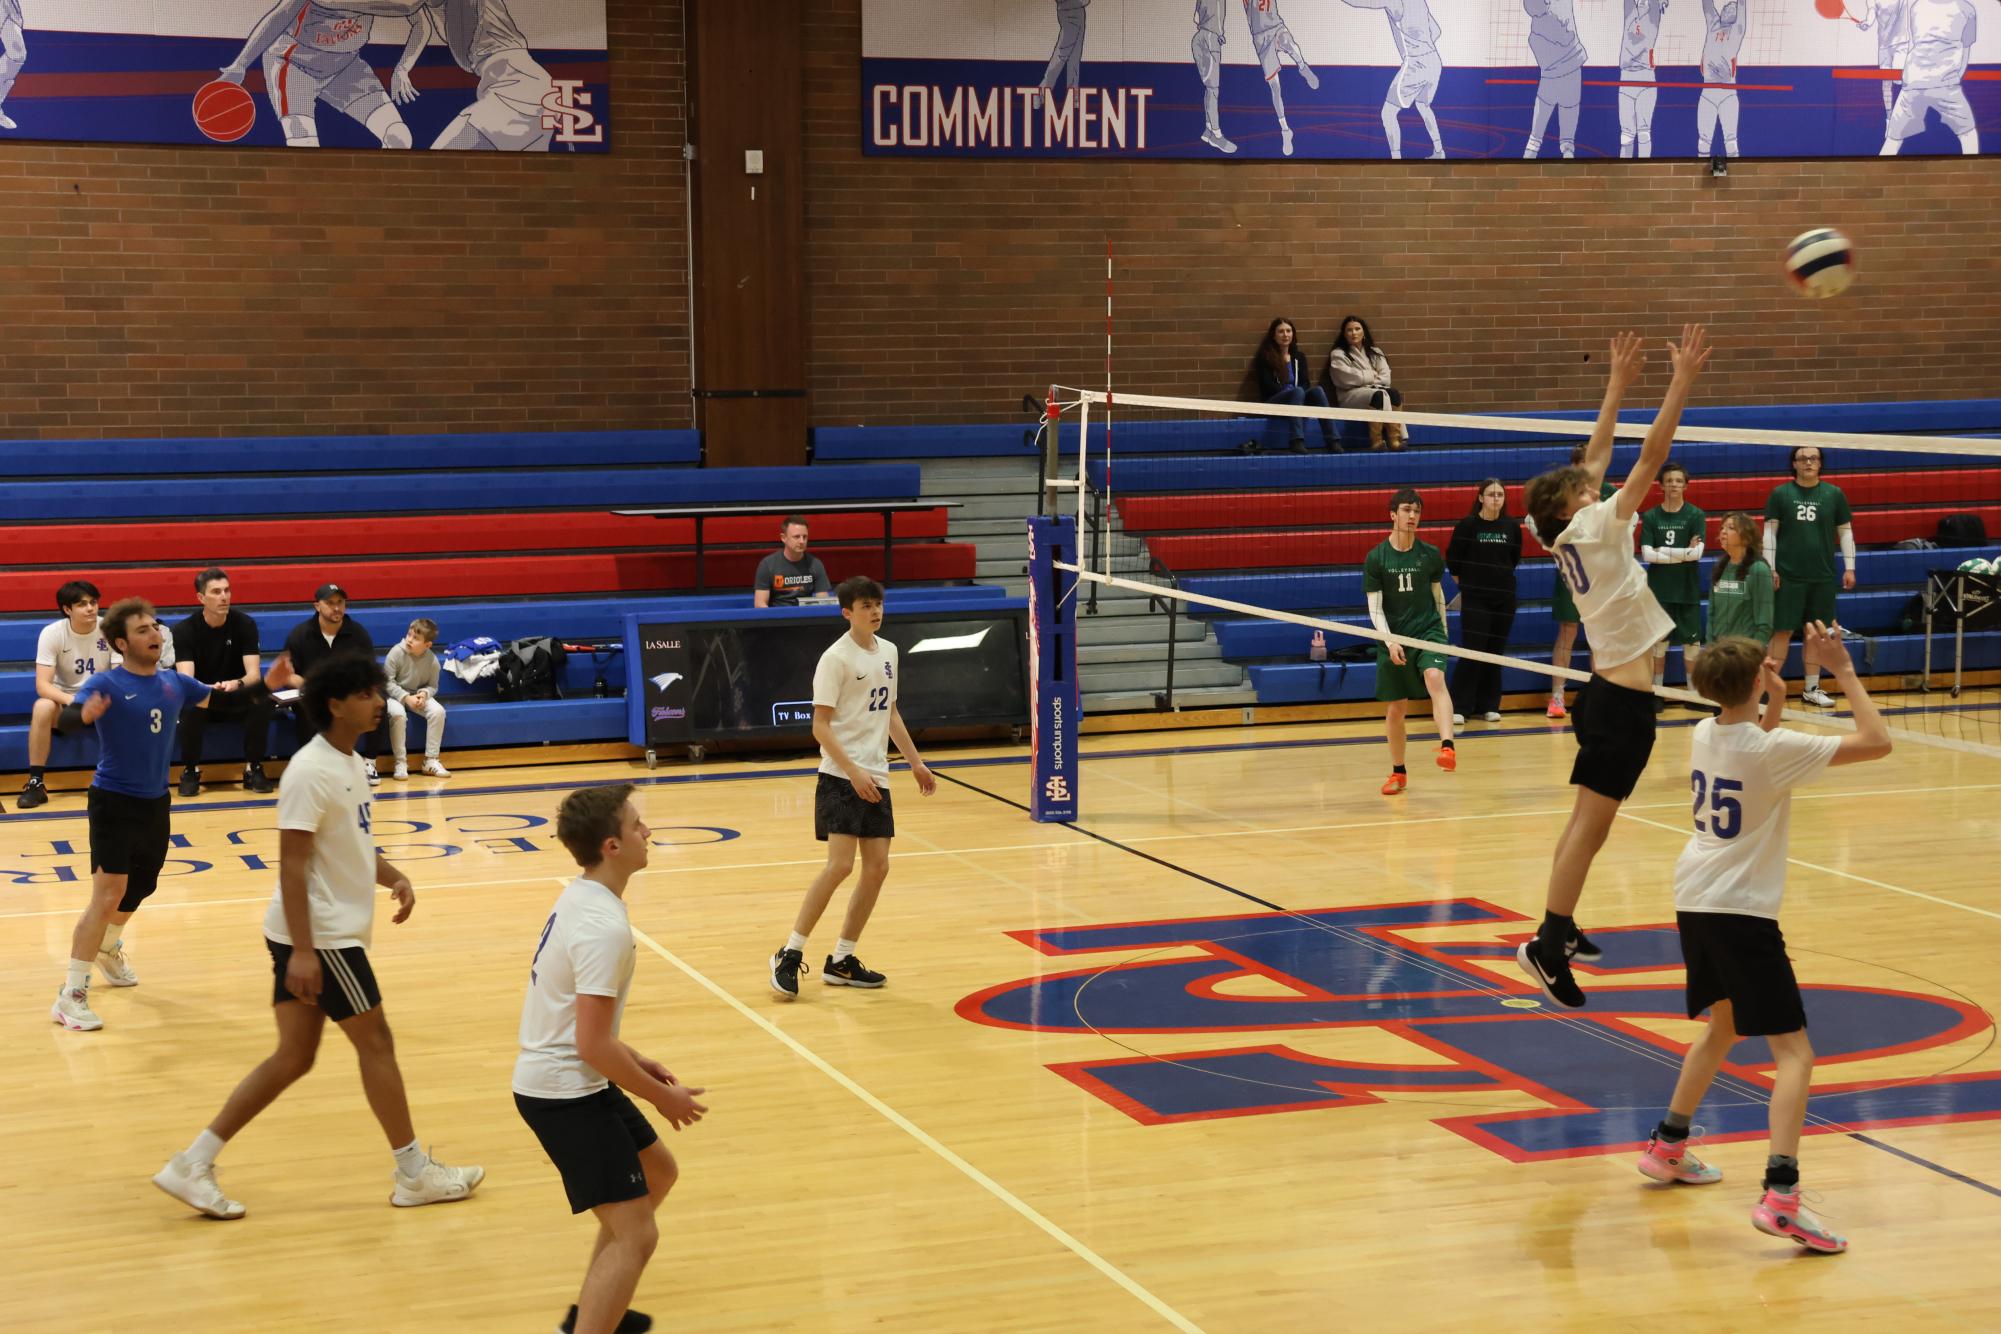 Boys+Volleyball+Team+Conquers+The+Net%2C+Earning+Their+First+Ever+Victory+In+A+Match+Against+Estacada+High+School